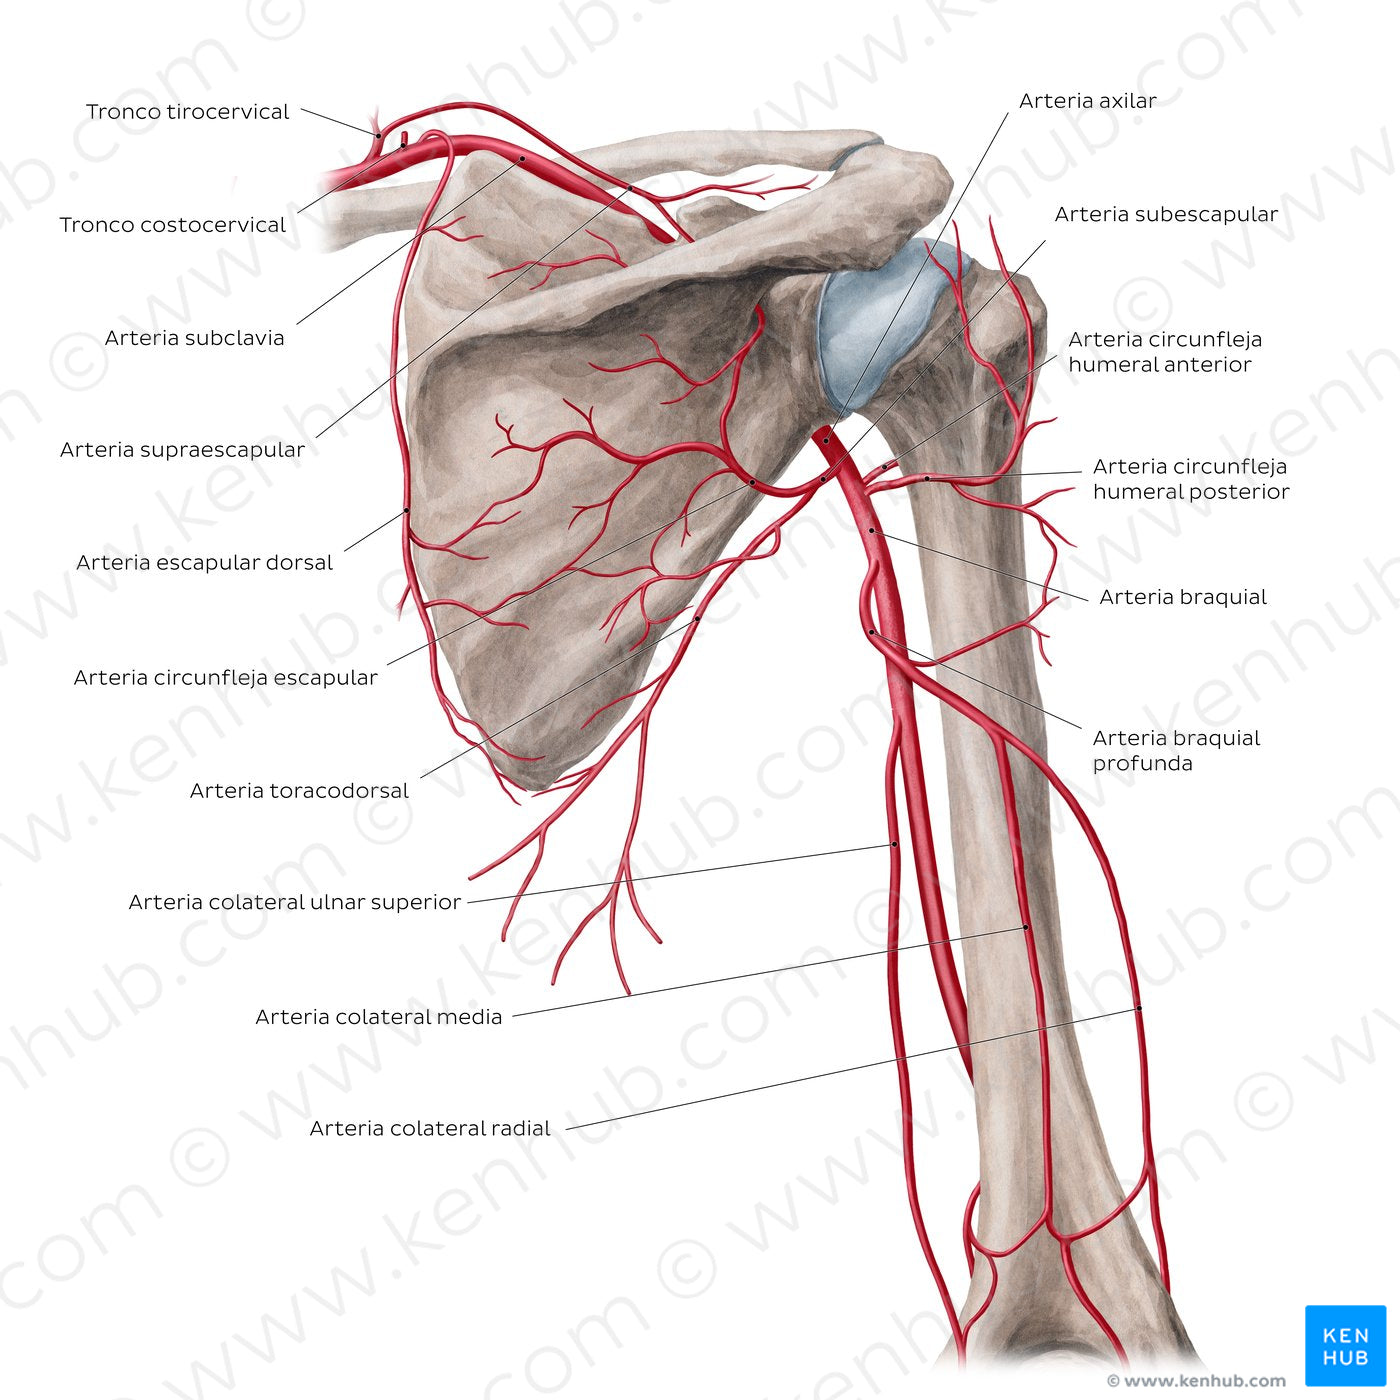 Arteries of the arm and the shoulder - Posterior view (Spanish)